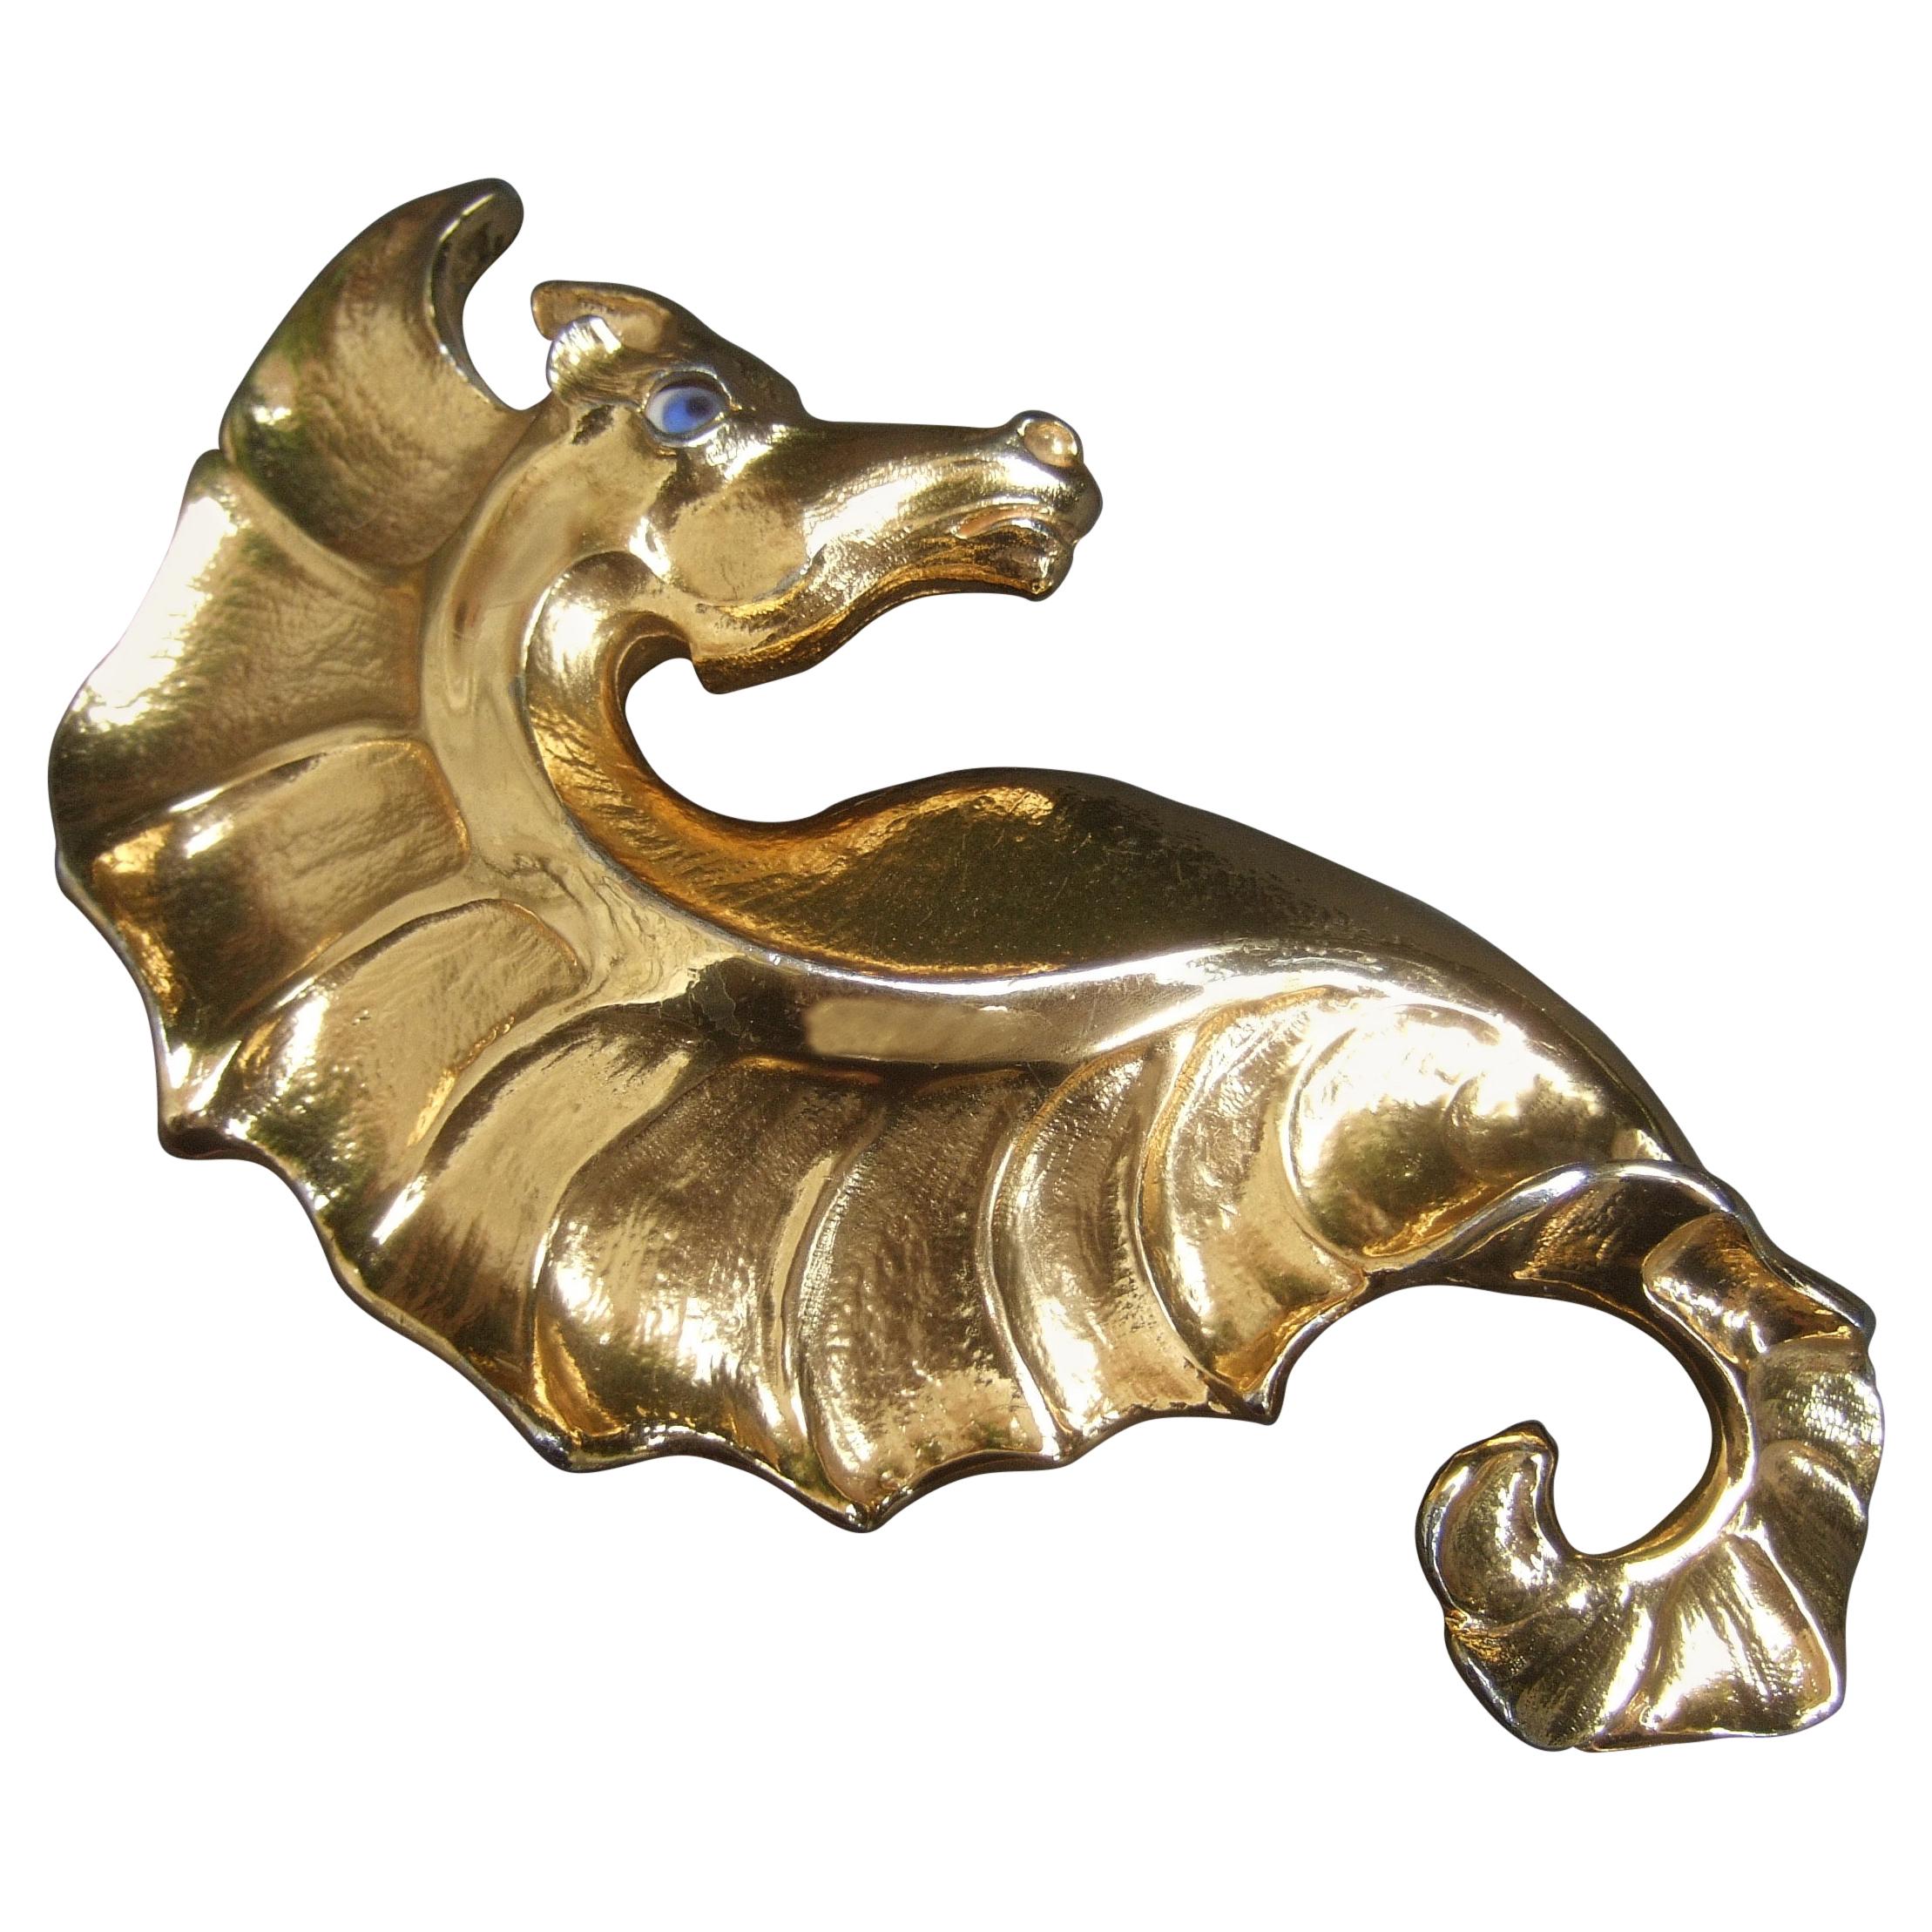 Christopher Ross Rare Massive 24k Gold Plated Seahorse Belt Buckle c 1980s For Sale